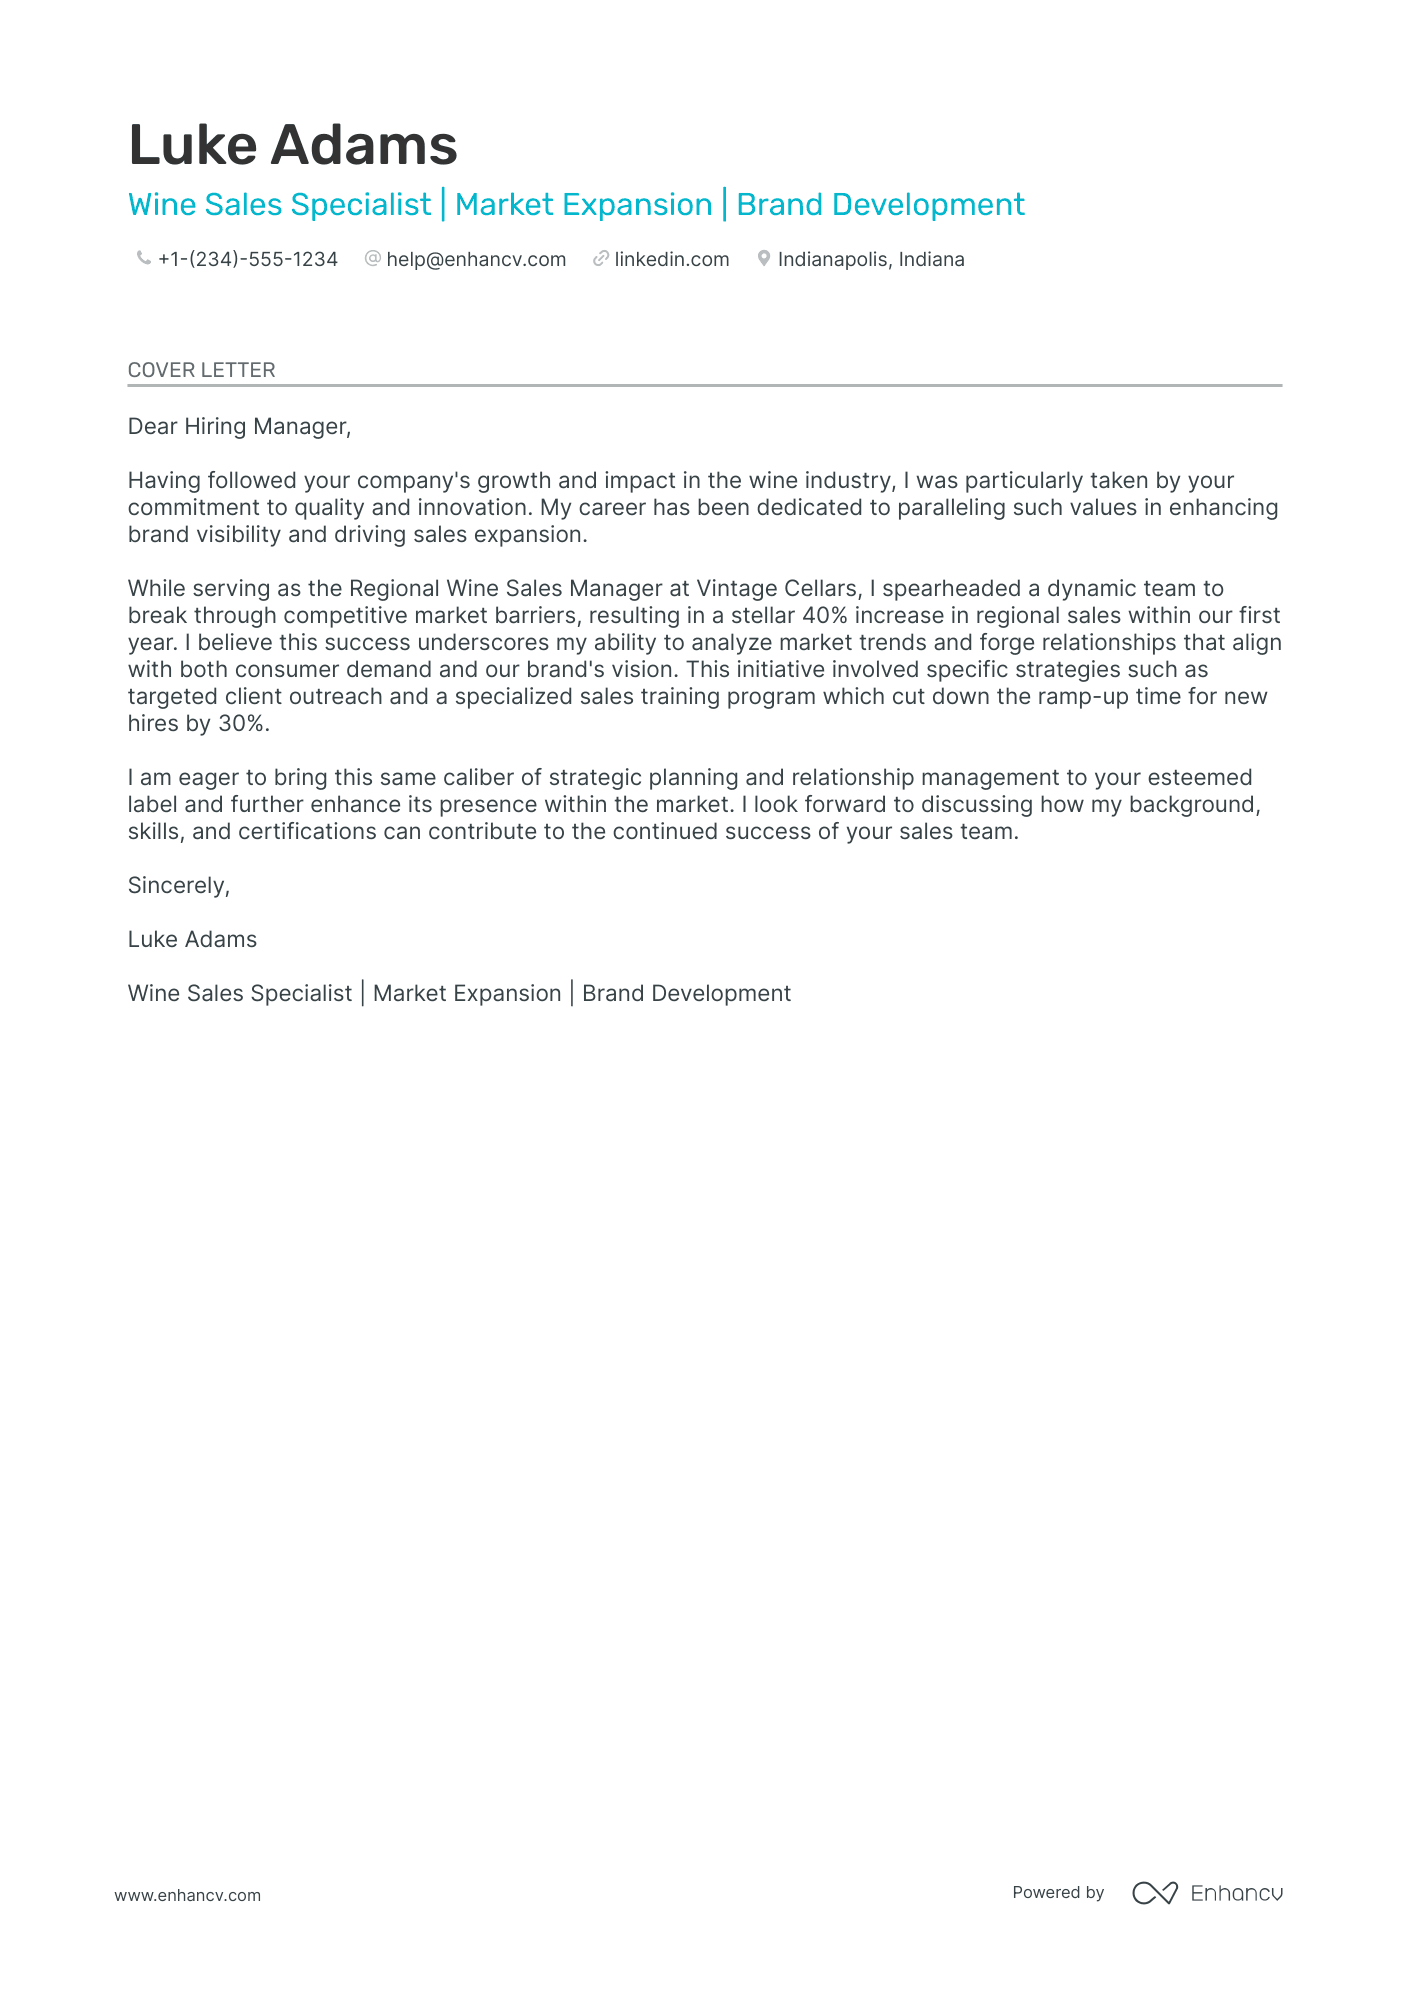 Wine Sales cover letter